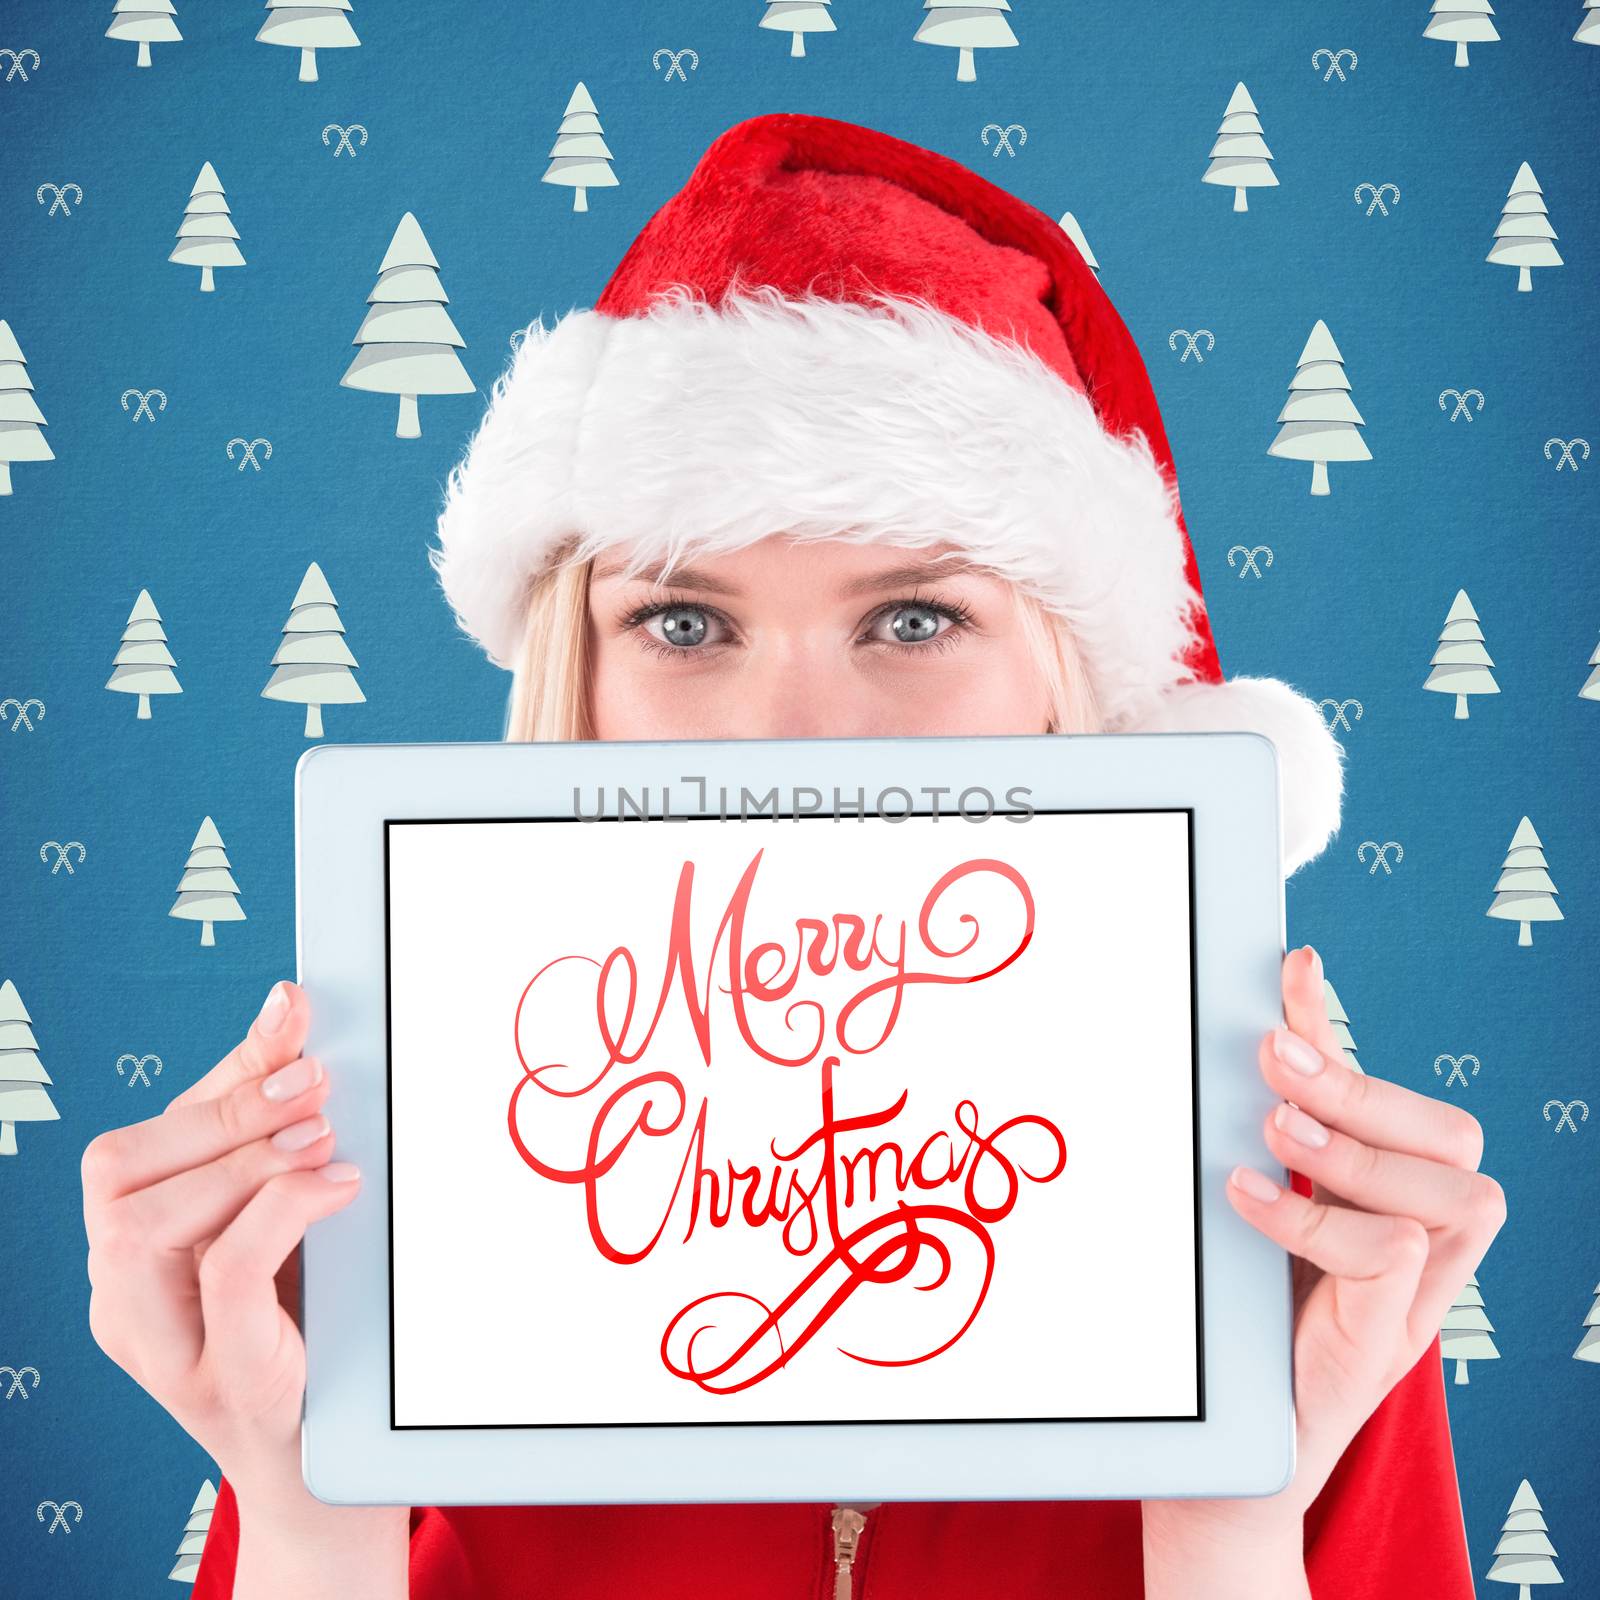 Festive blonde holding a tablet pc against fir tree wall paper